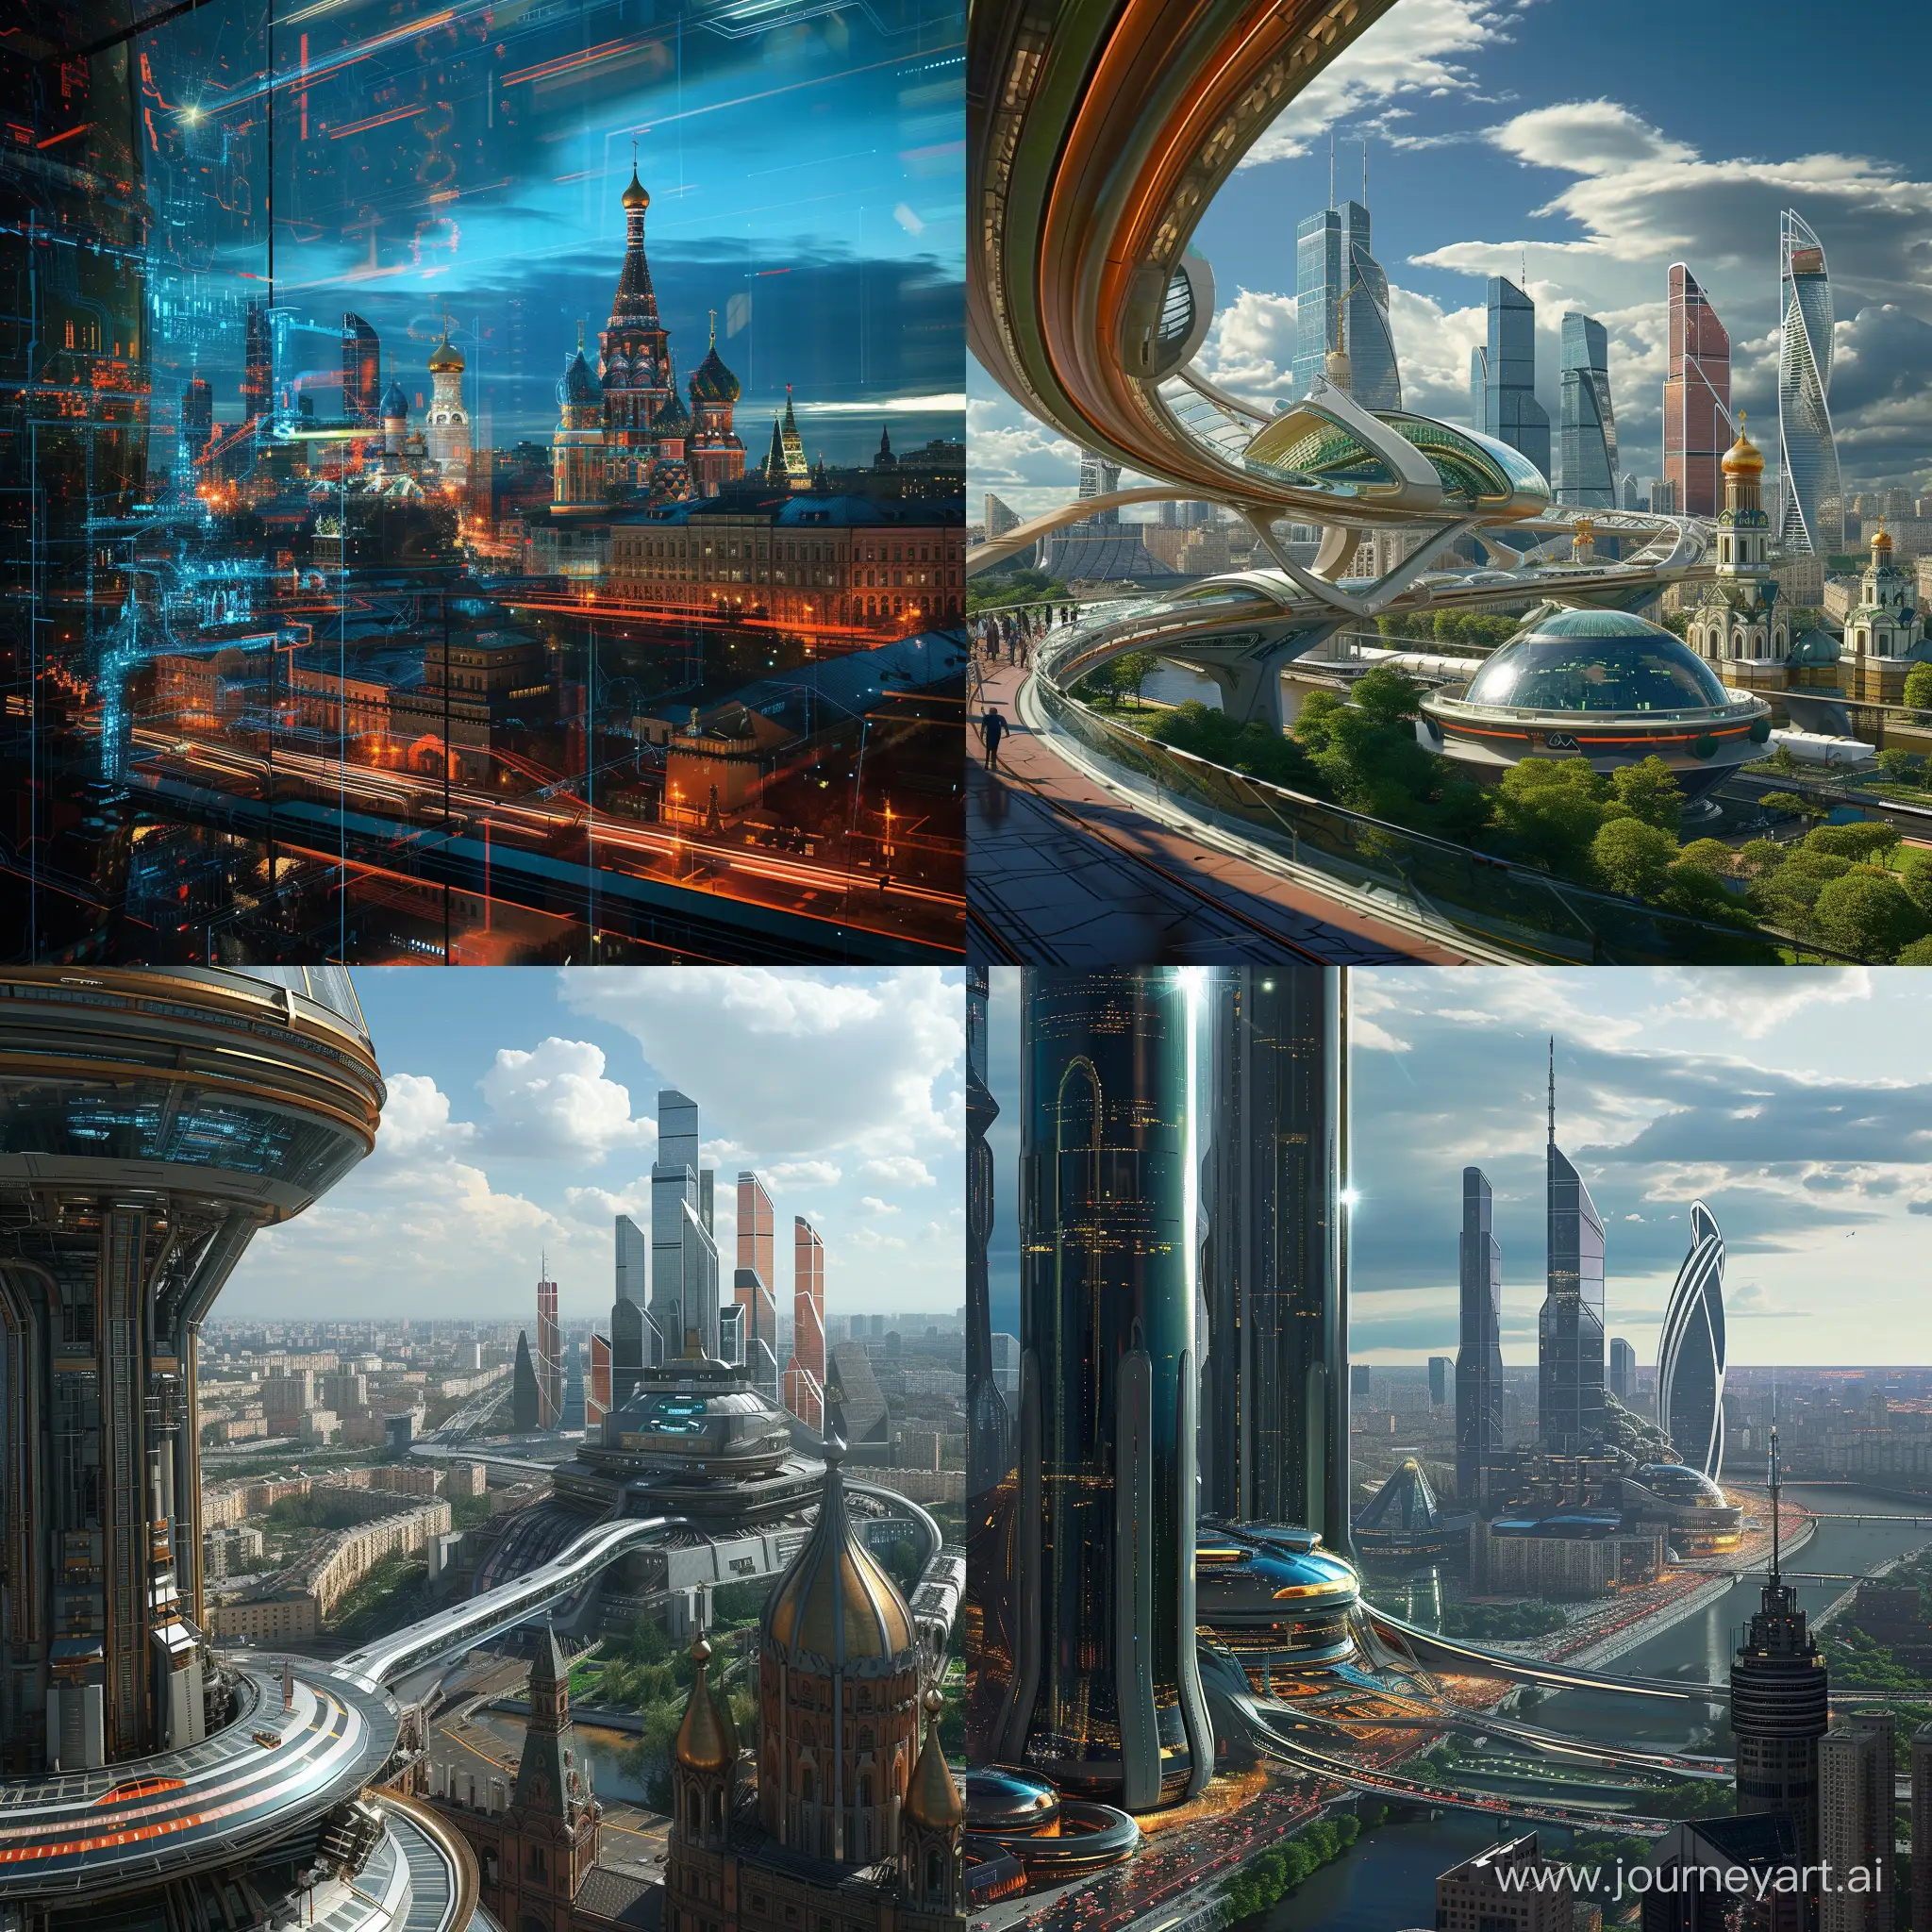 Futuristic Moscow, in cinematic high-tech style